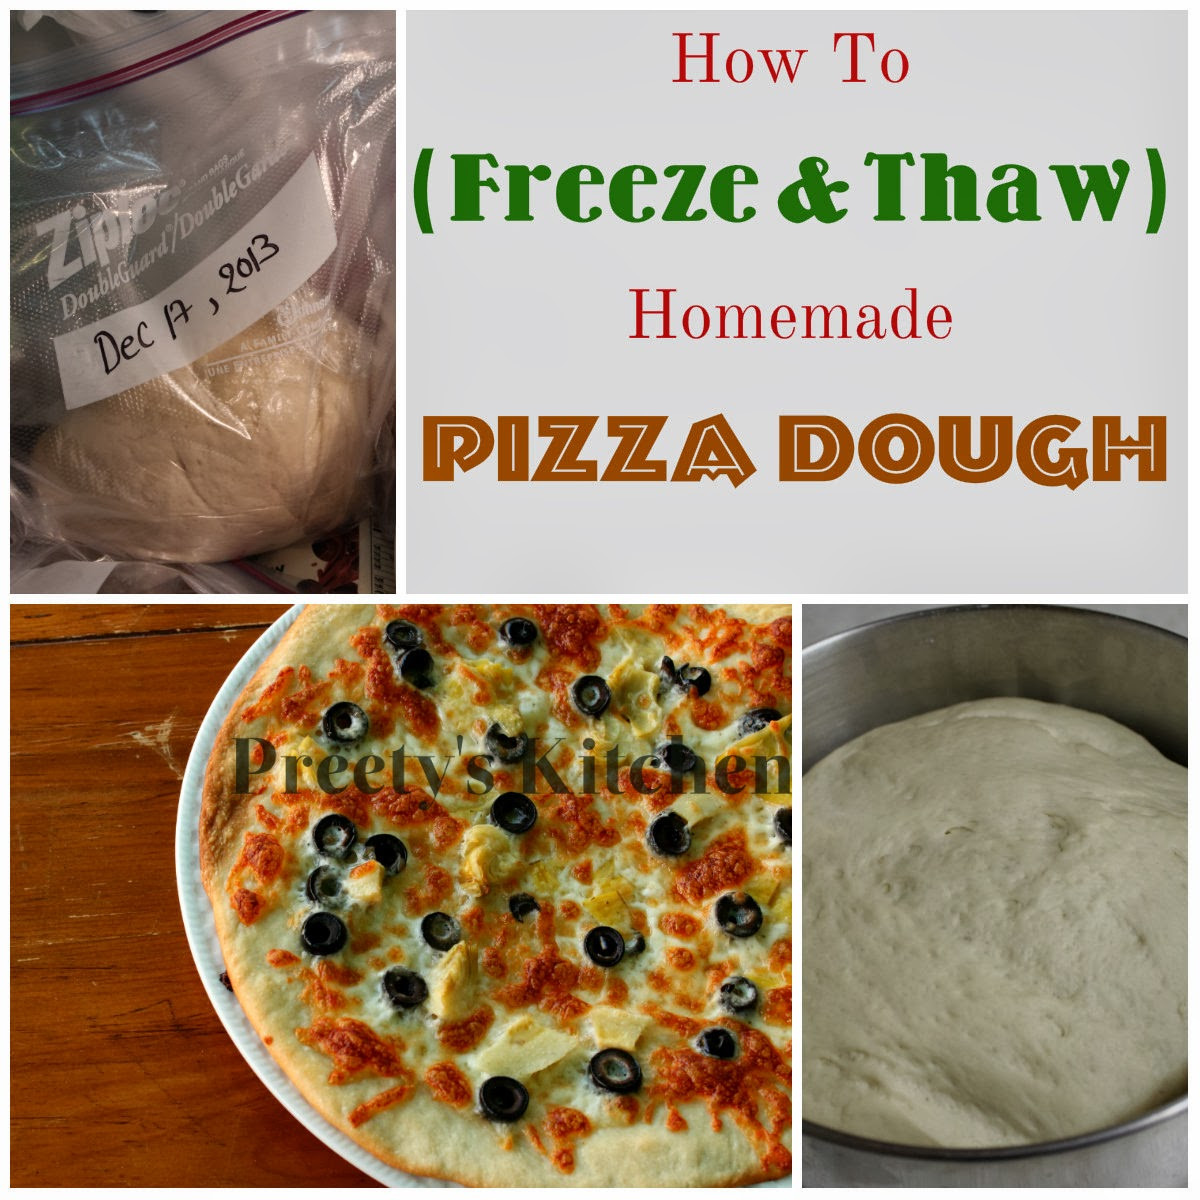 Freezing Pizza Dough
 Preety s Kitchen How To Freeze & Thaw Homemade Pizza